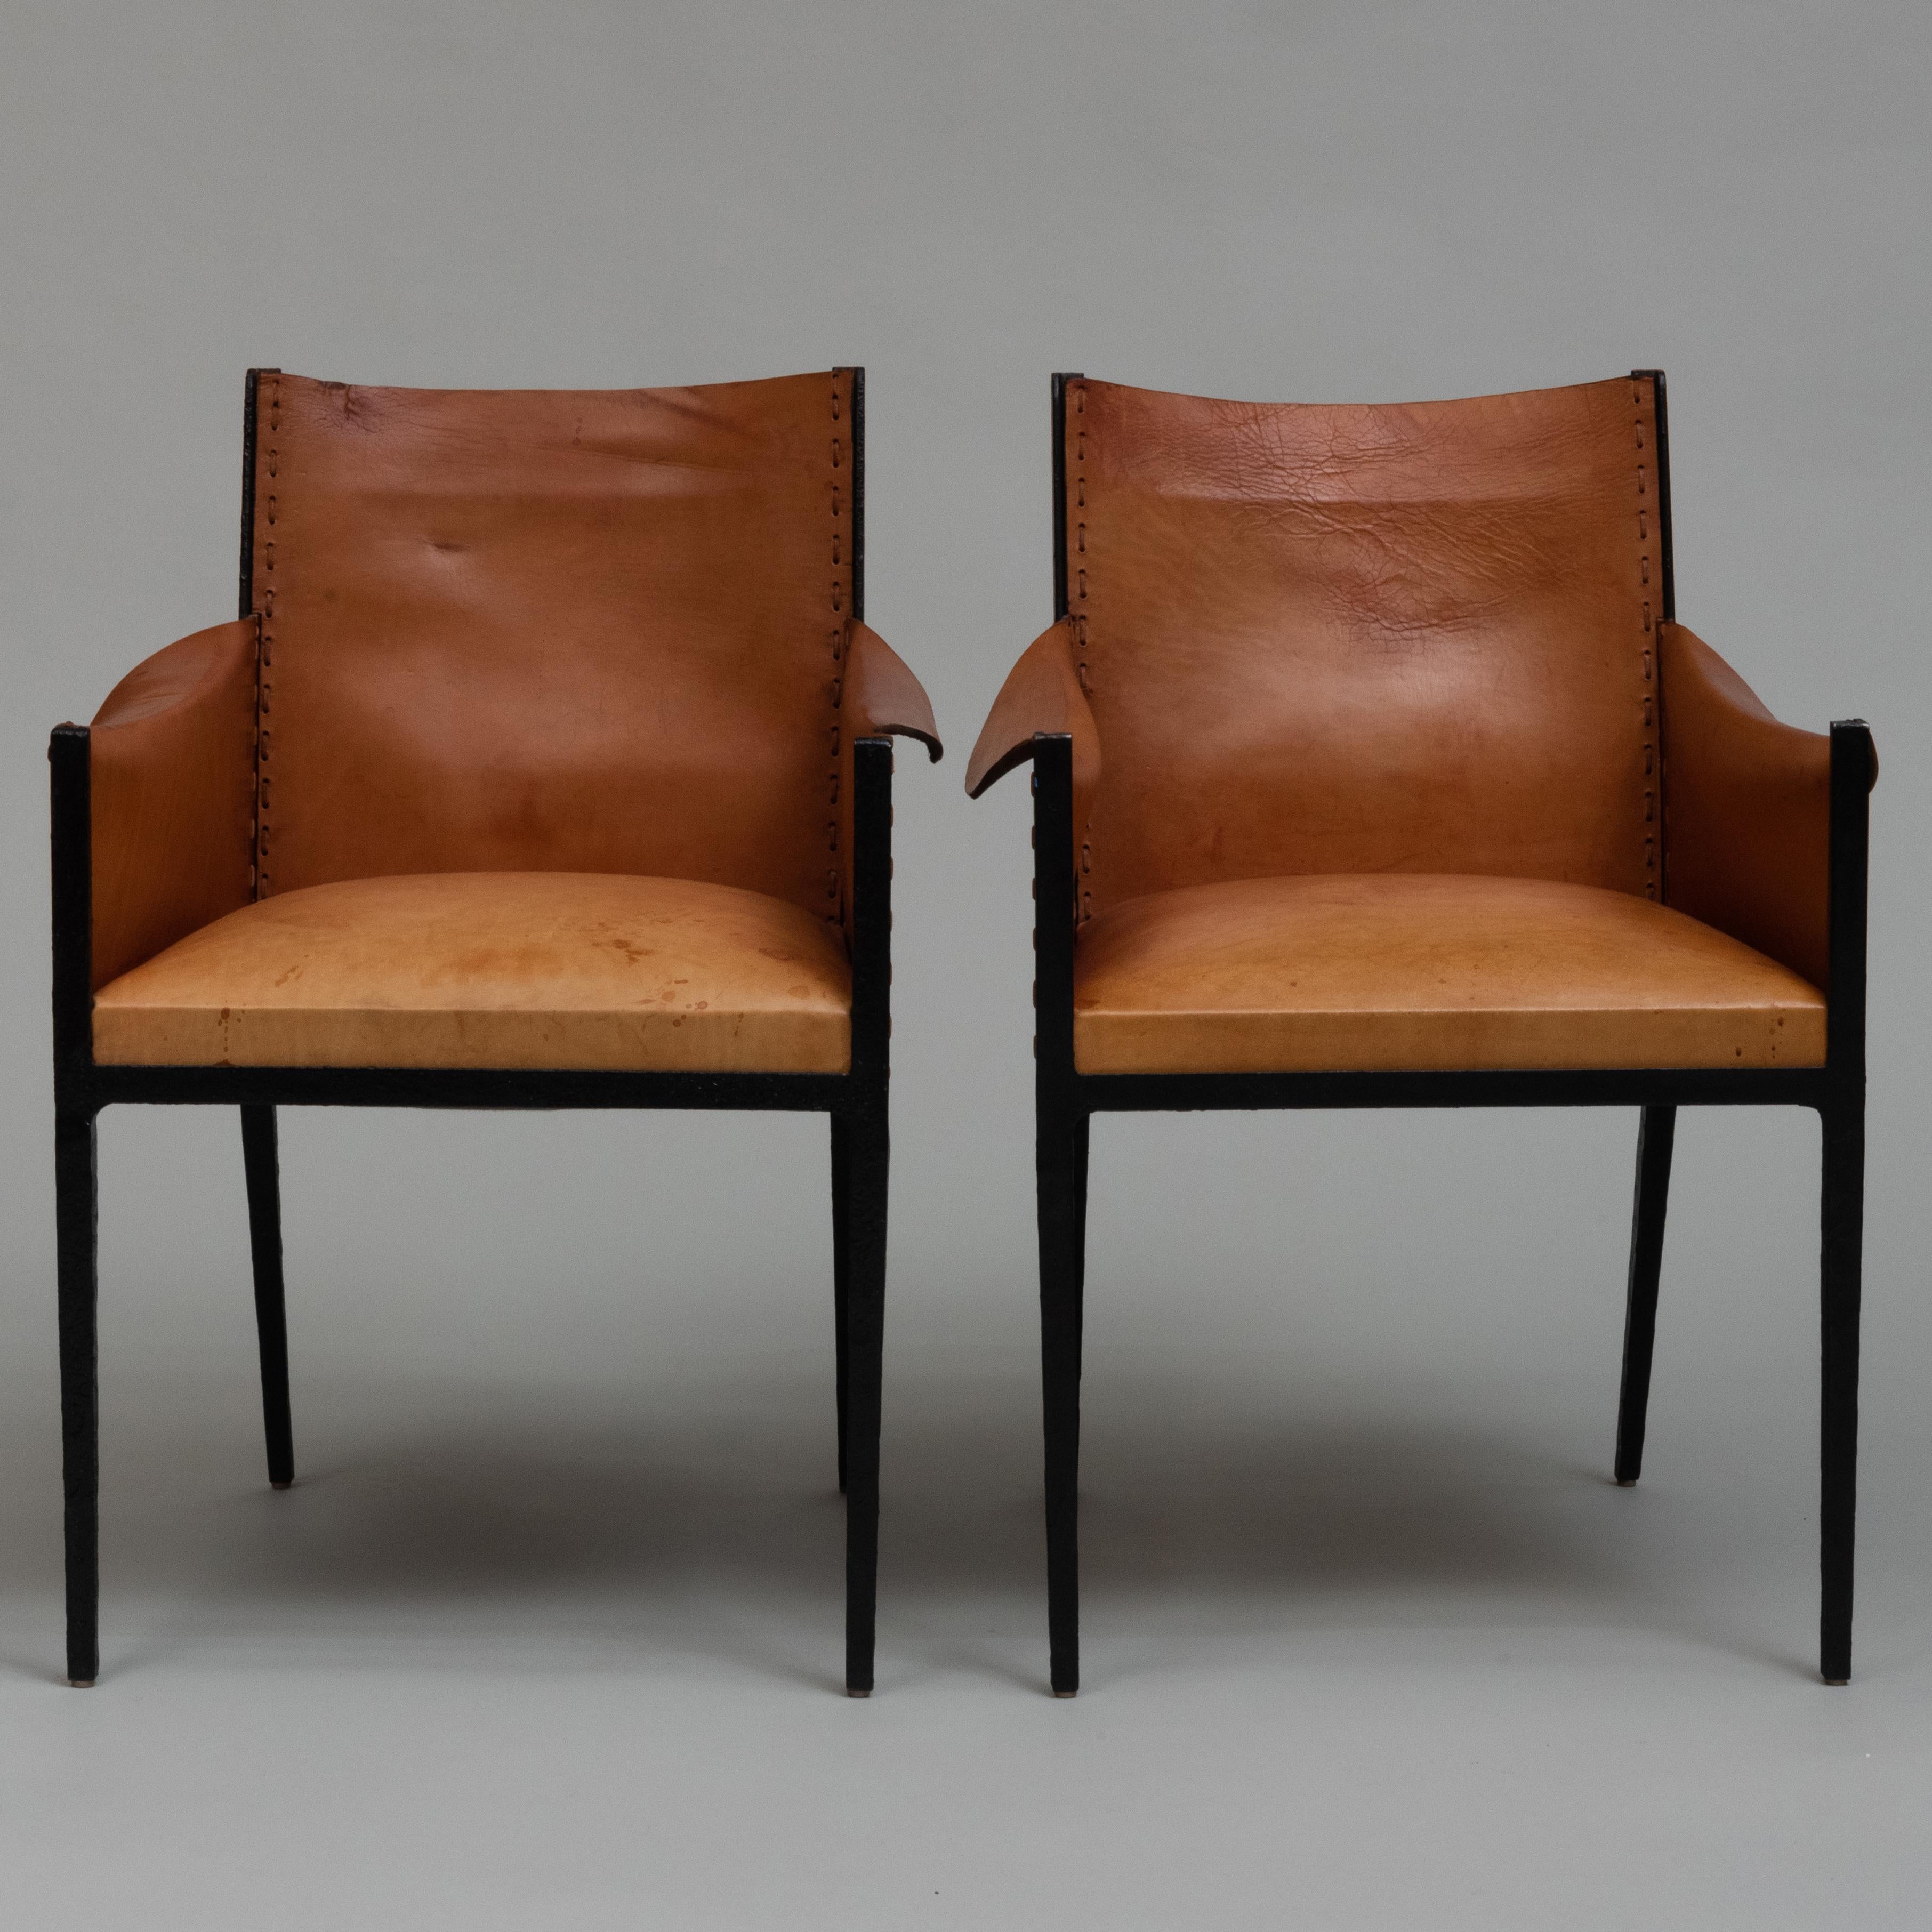 Pair of steel and leather armchairs after Jean Michel Frank. 
Property from the Collection of Mary Wells Lawrence.
Provenance:Mongiardo Studio, Inc., Great Barrington, MA, April 20, 2004.